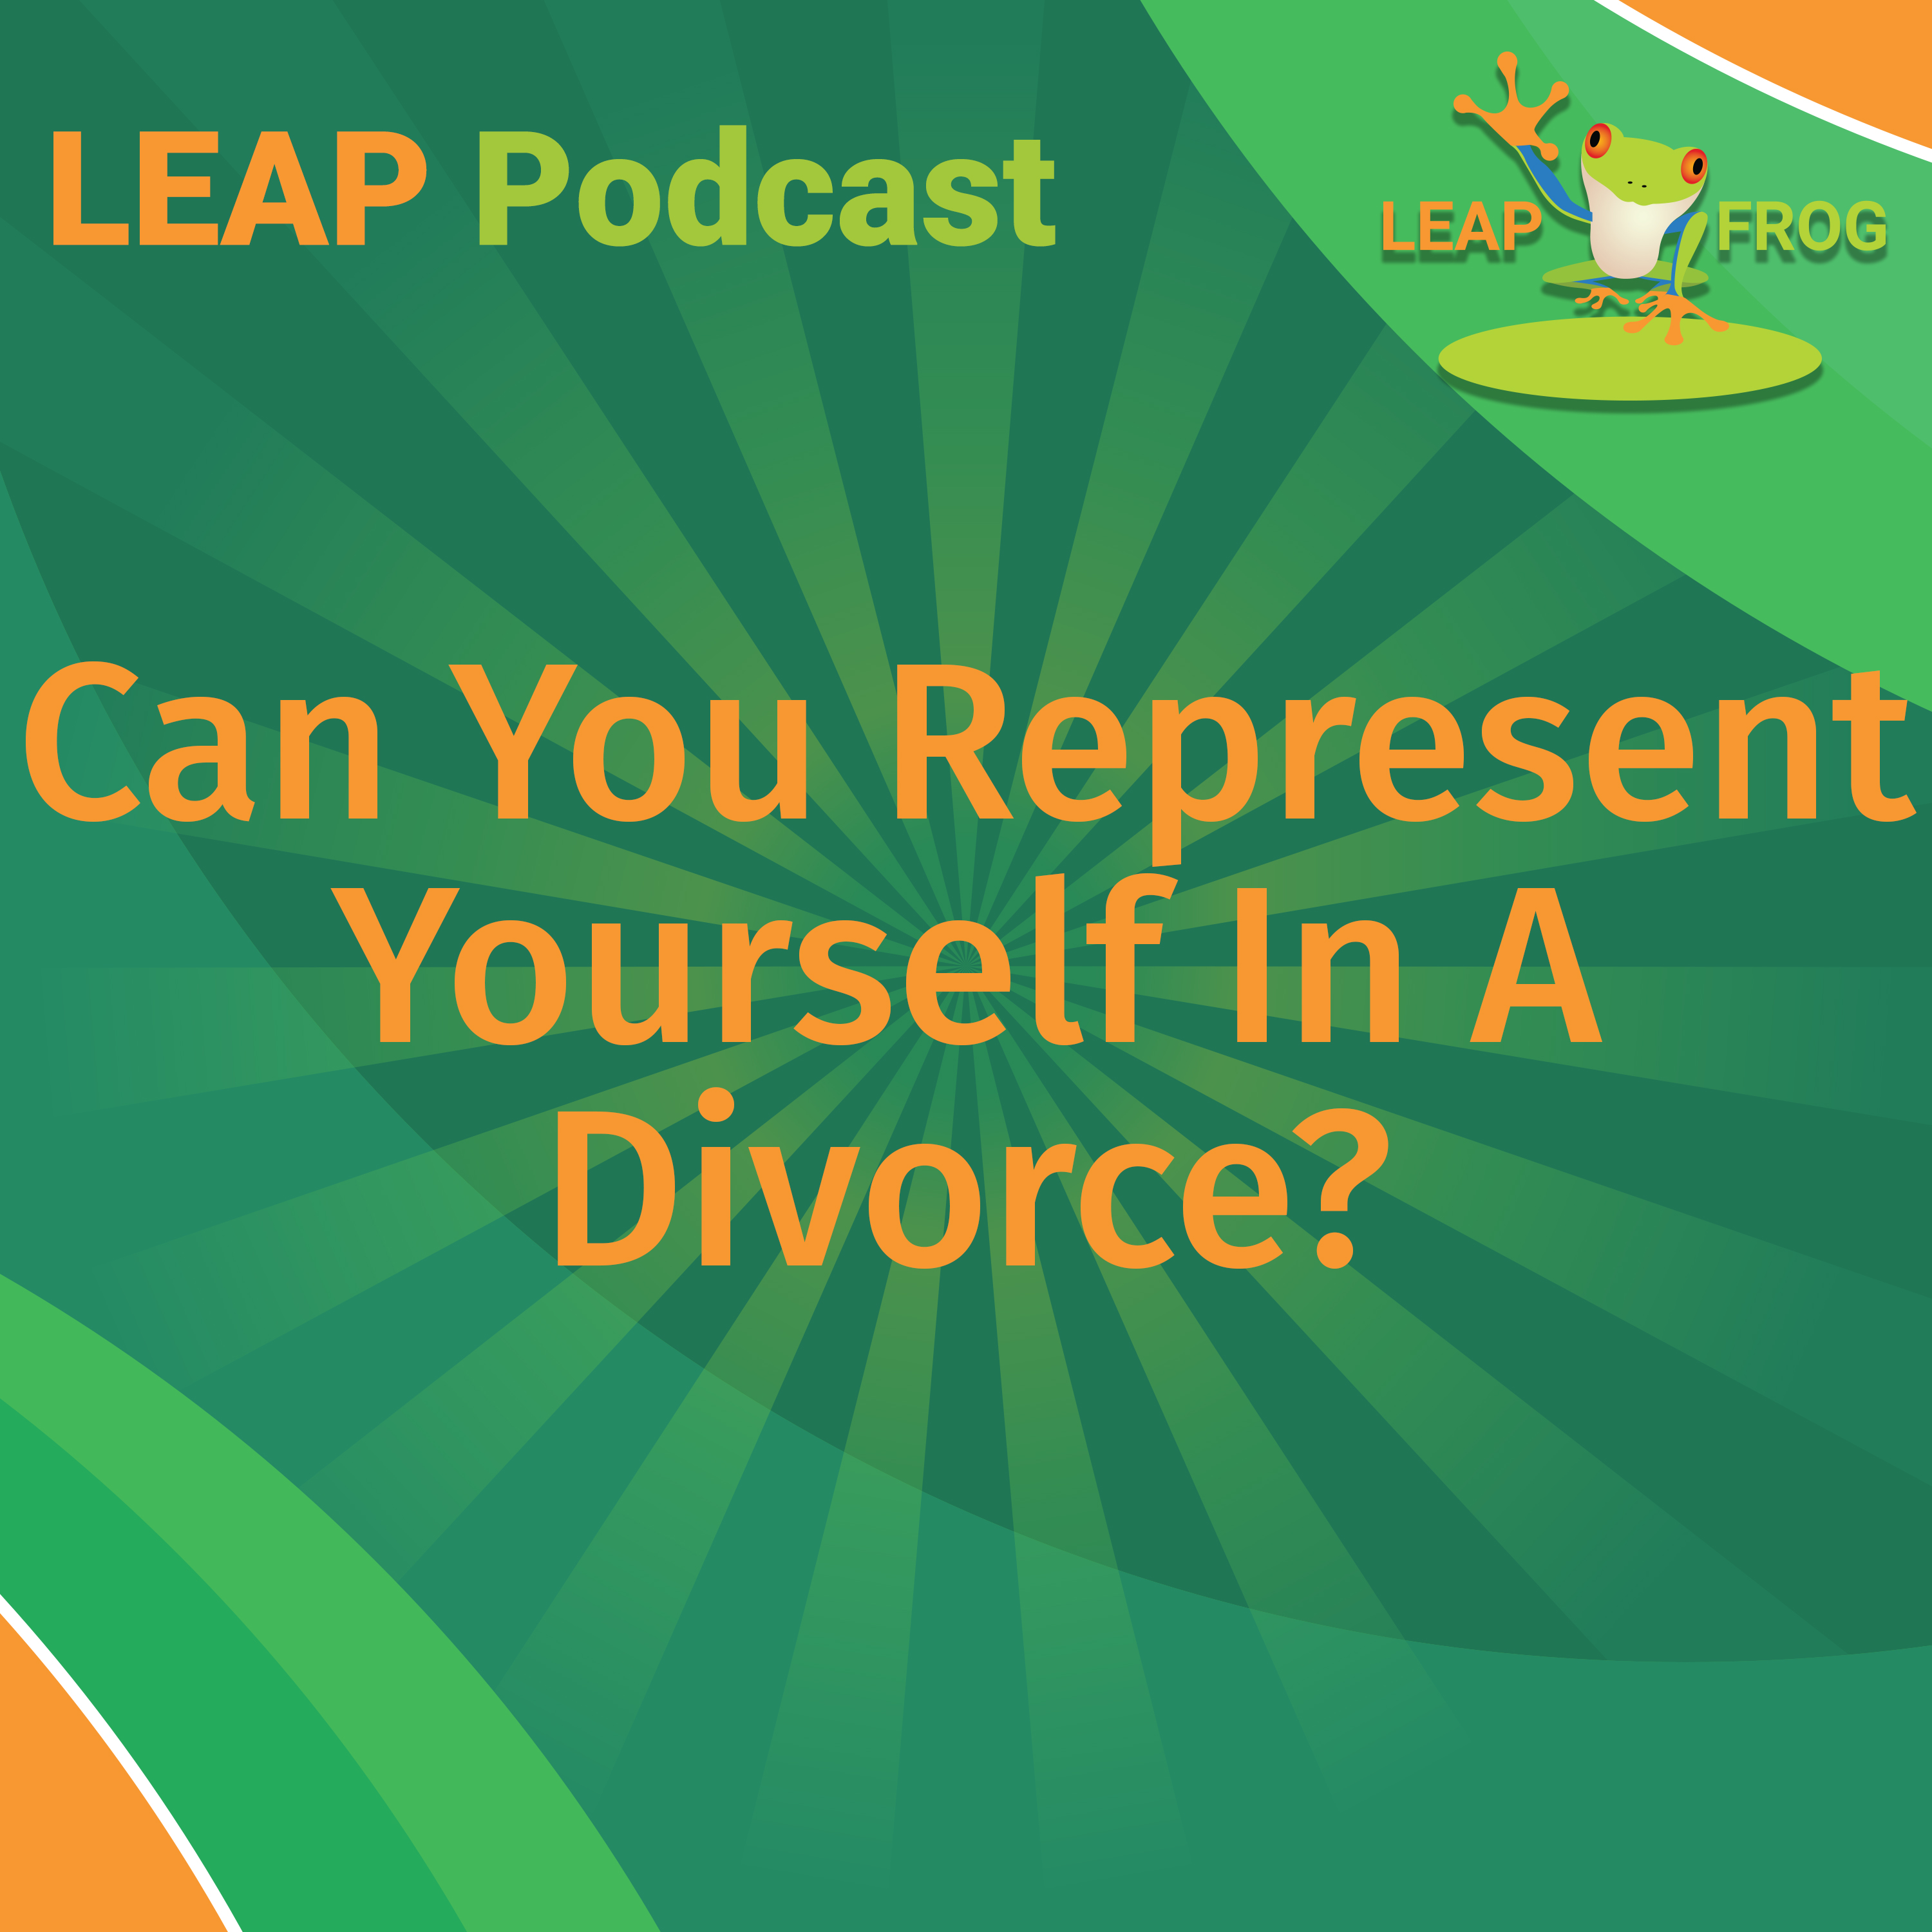 LEAP Podcast Can You Represent Yourself In A Divorce episode cover art